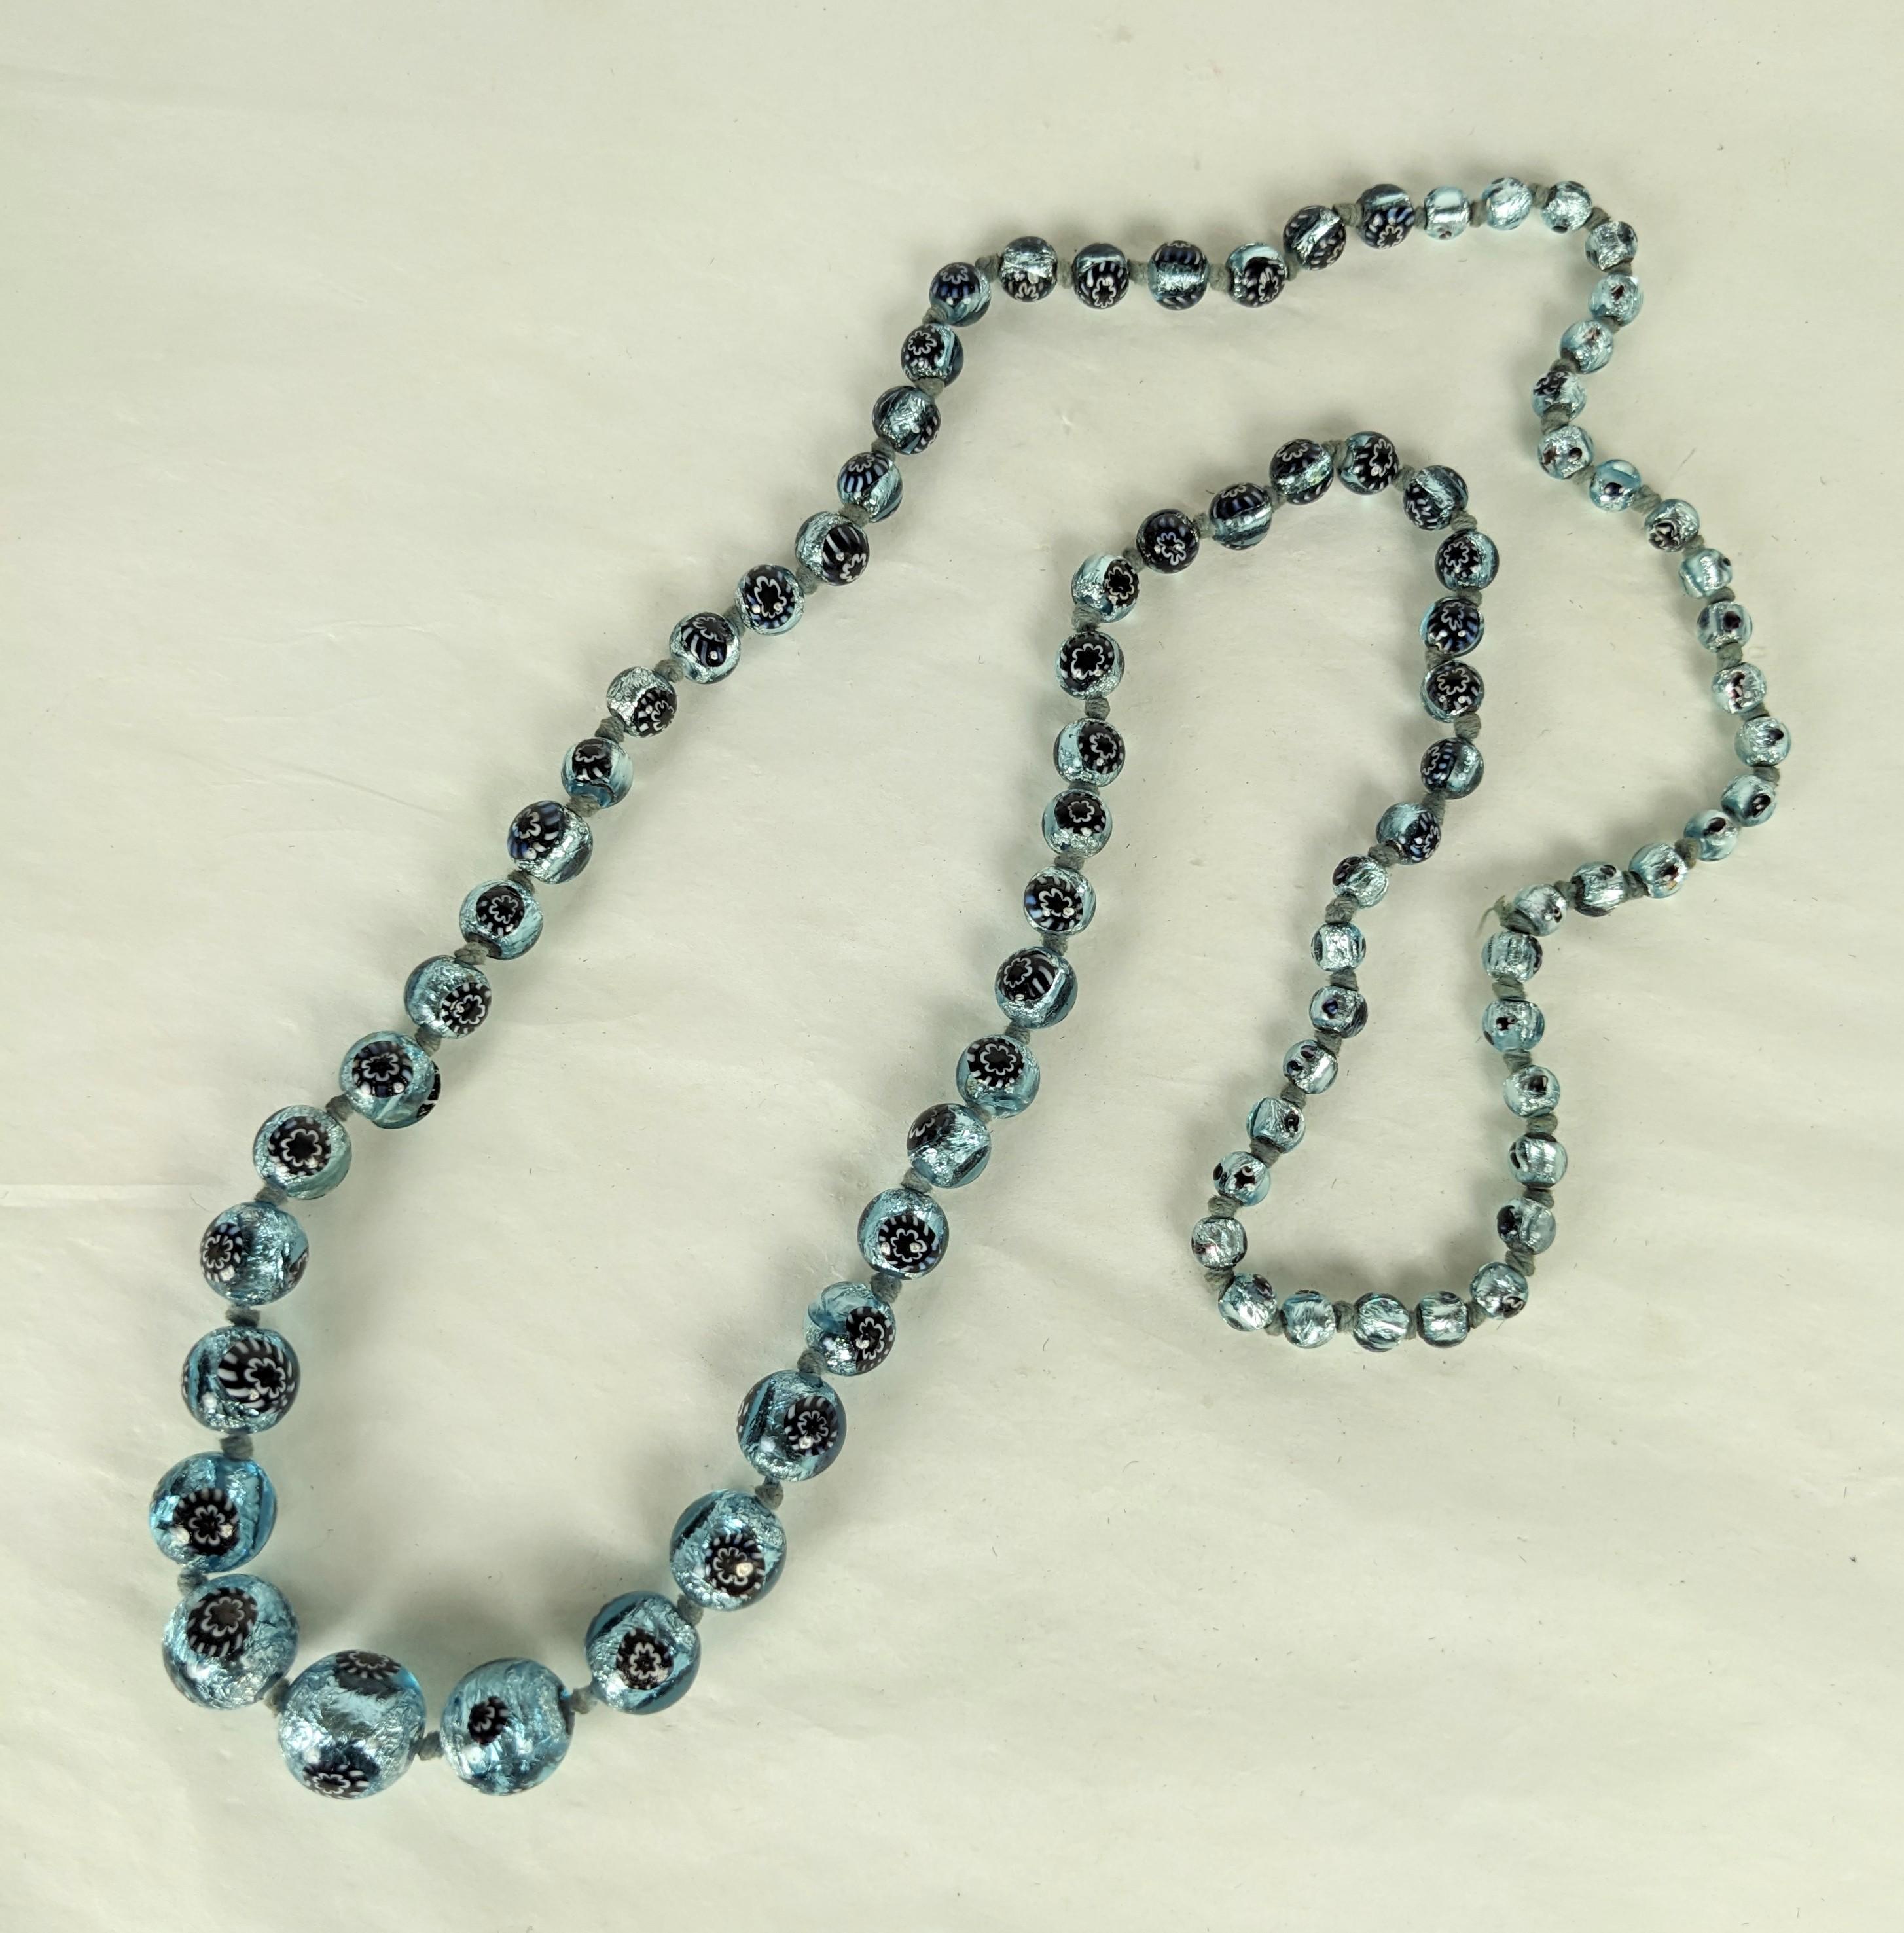 Art Deco Silver Foiled Murano Beads from the 1930's. Graduated and handmade with silvered foil within aquamarine glass and floral murrine. Handmade and hand knotted, lovely quality.  30